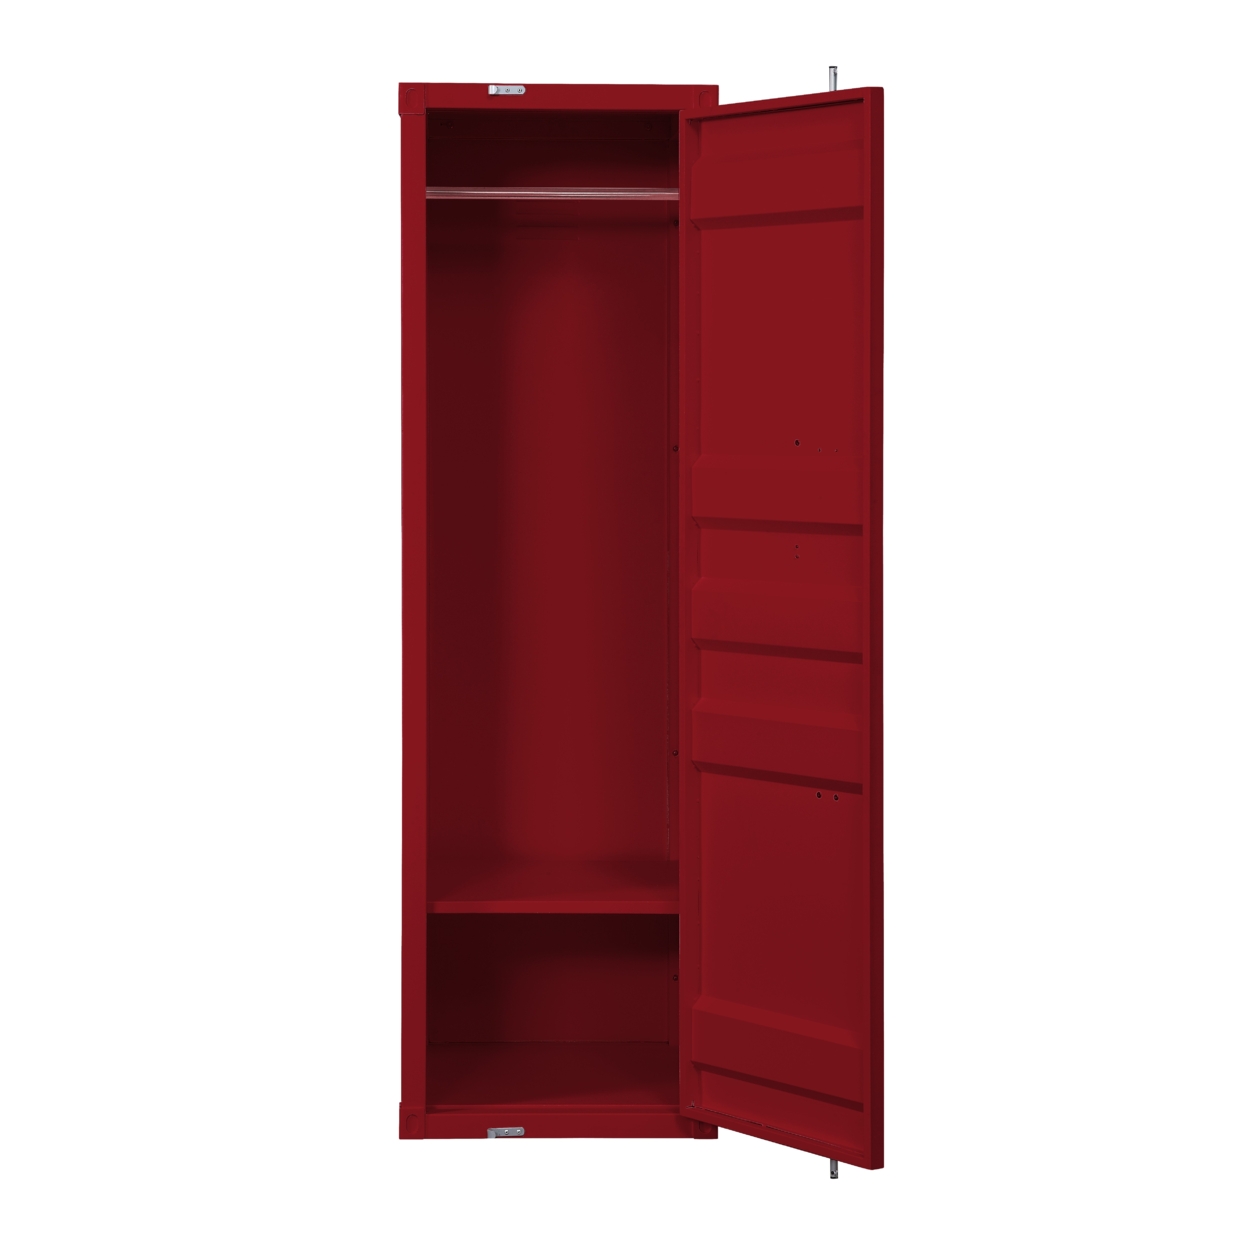 Single Door Wardrobe With Double Storage Compartment And Cremone Bolt, Red- Saltoro Sherpi